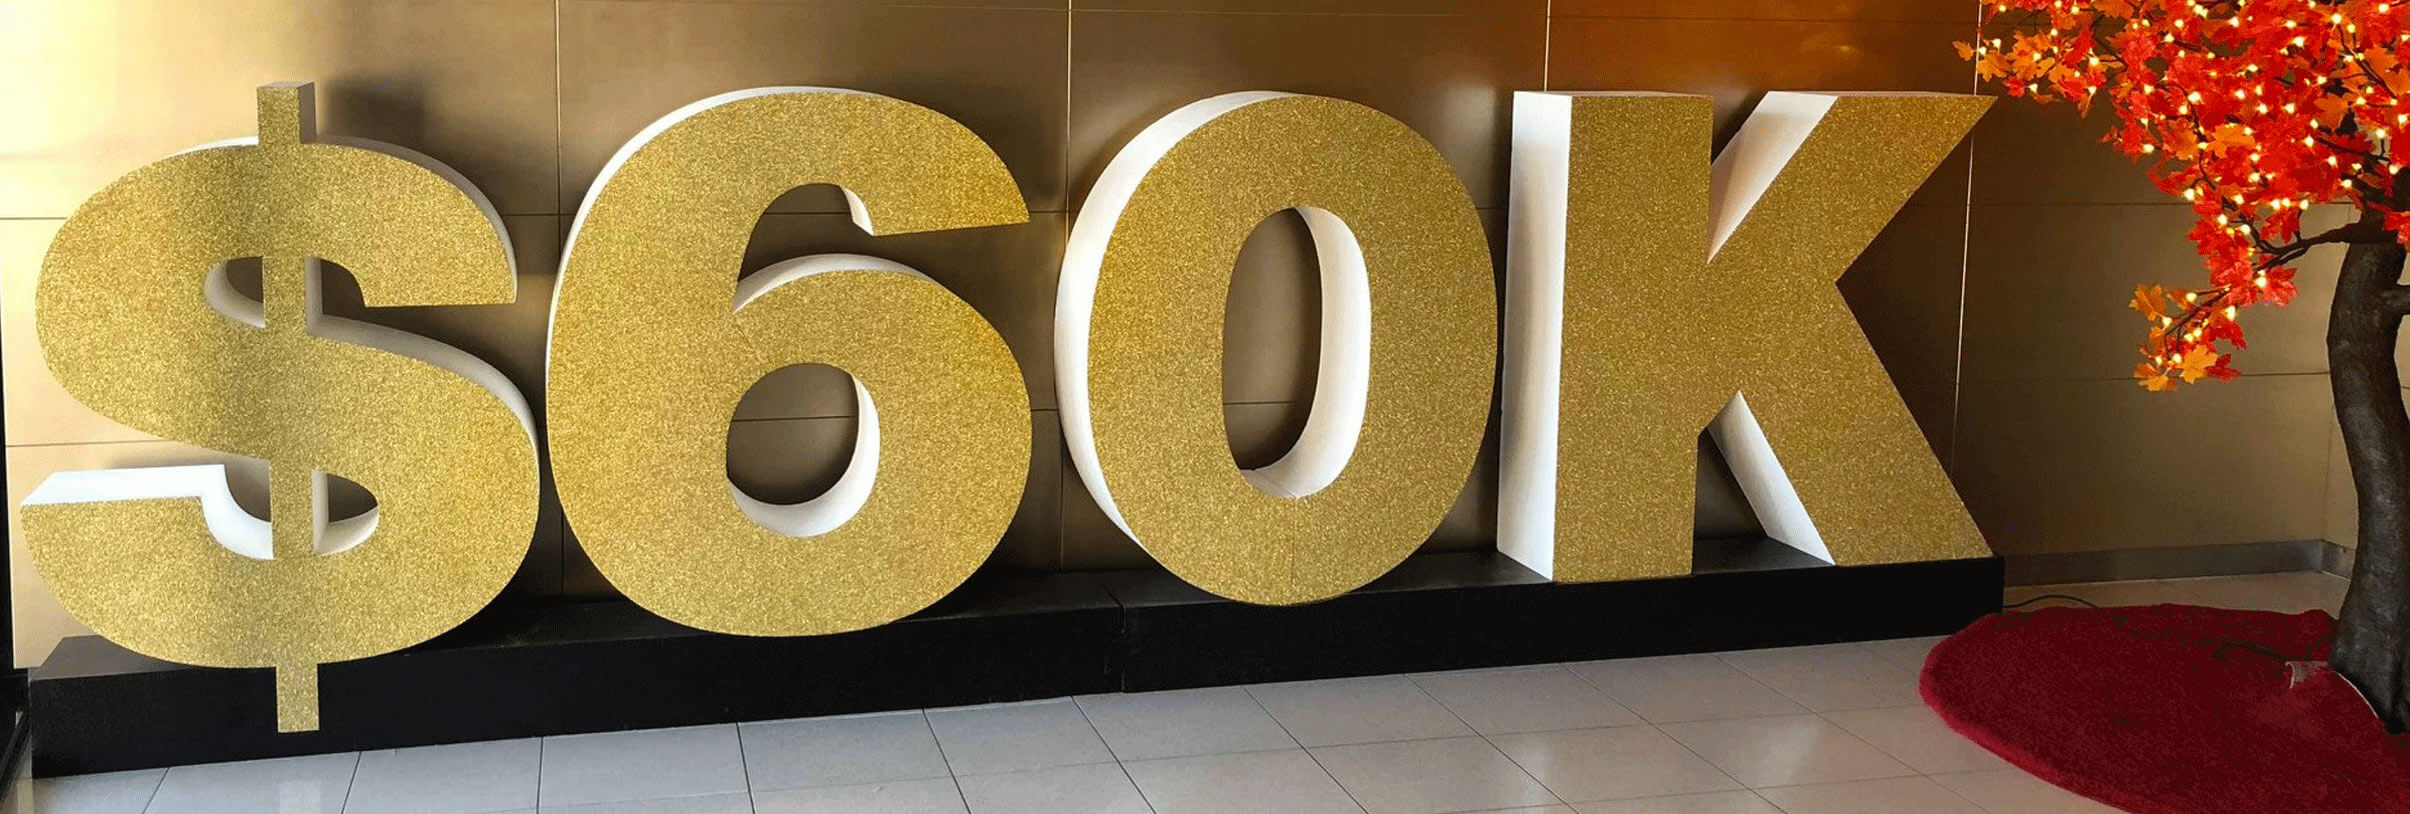 Custom 3D Foam Letters & Numbers for Events and Businesses